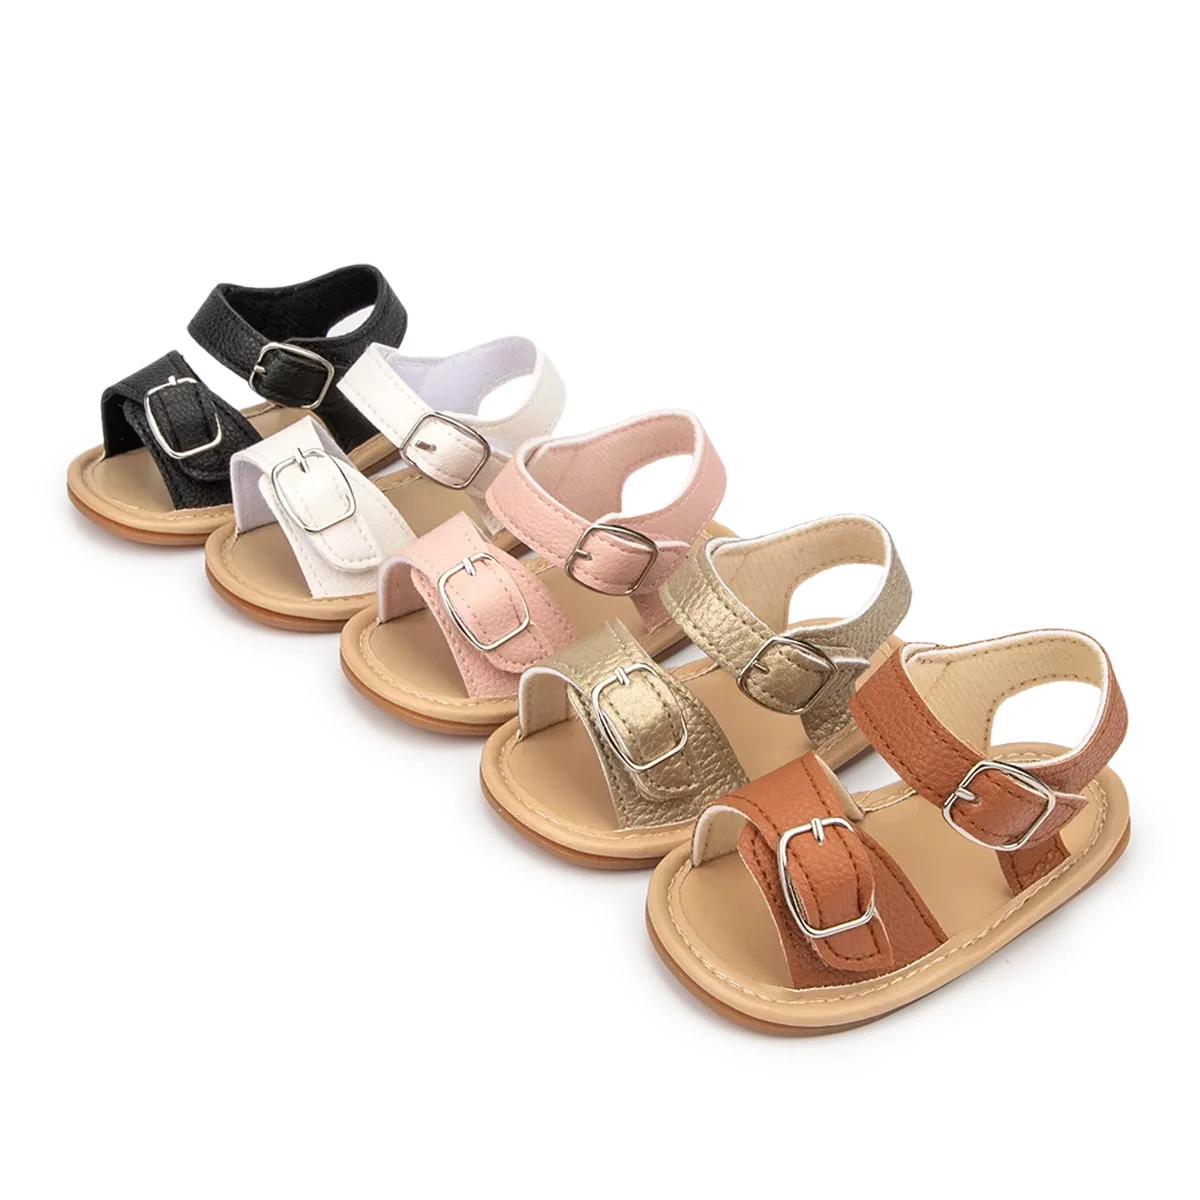 New Arrival PU Leather Walking Shoes Toddler Boy Girl Anti-slip Sole Baby Sandals